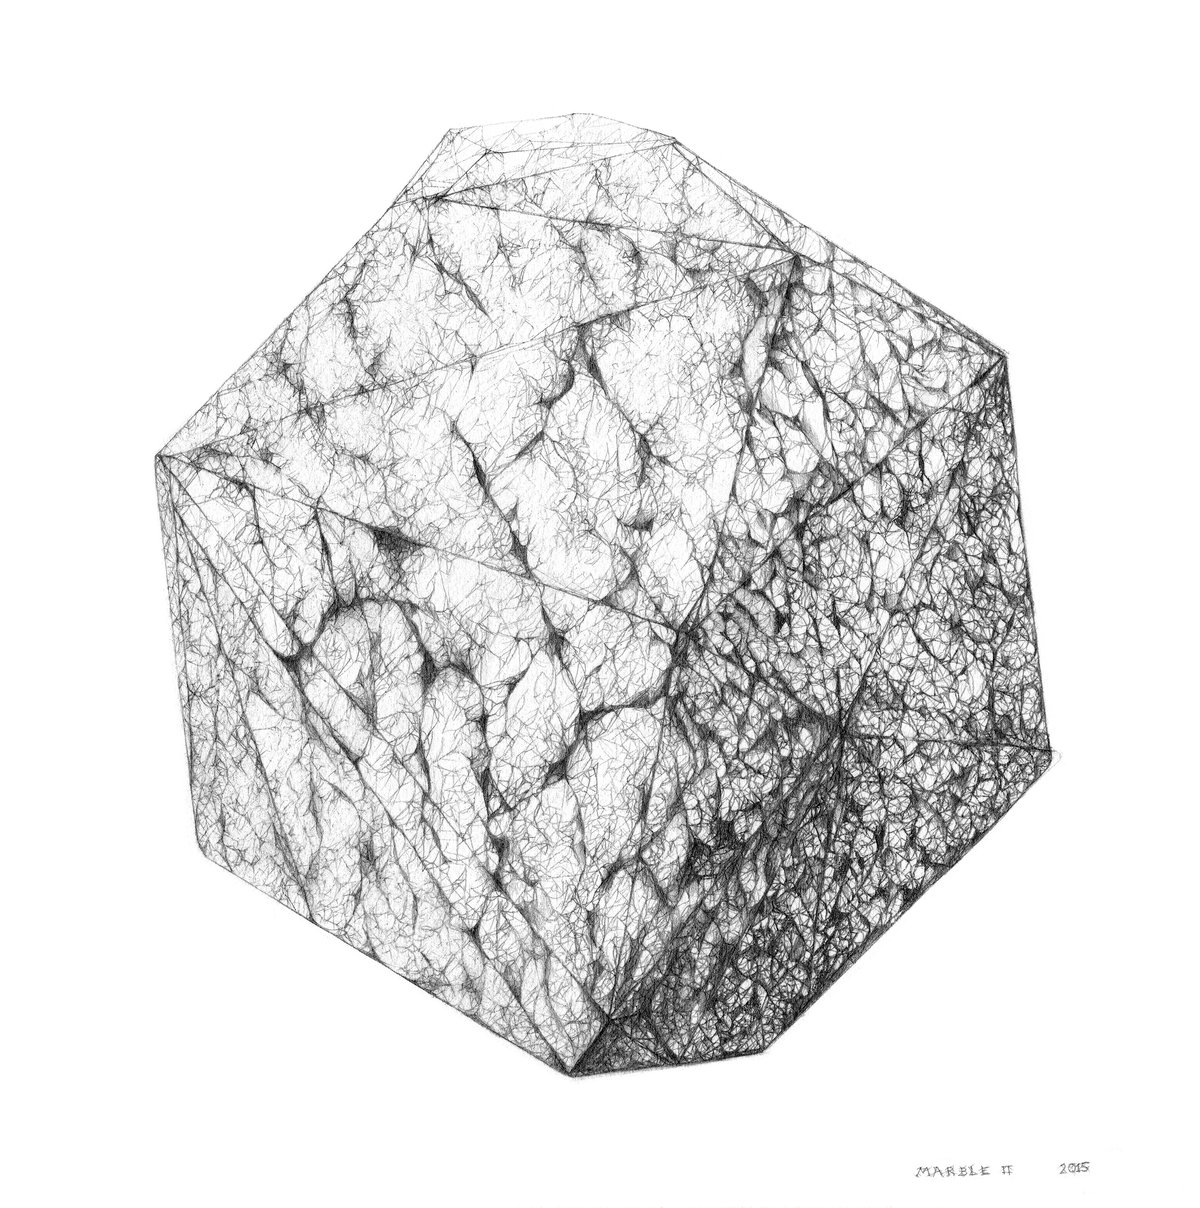 Image of Marble II - Archival Giclée Print 